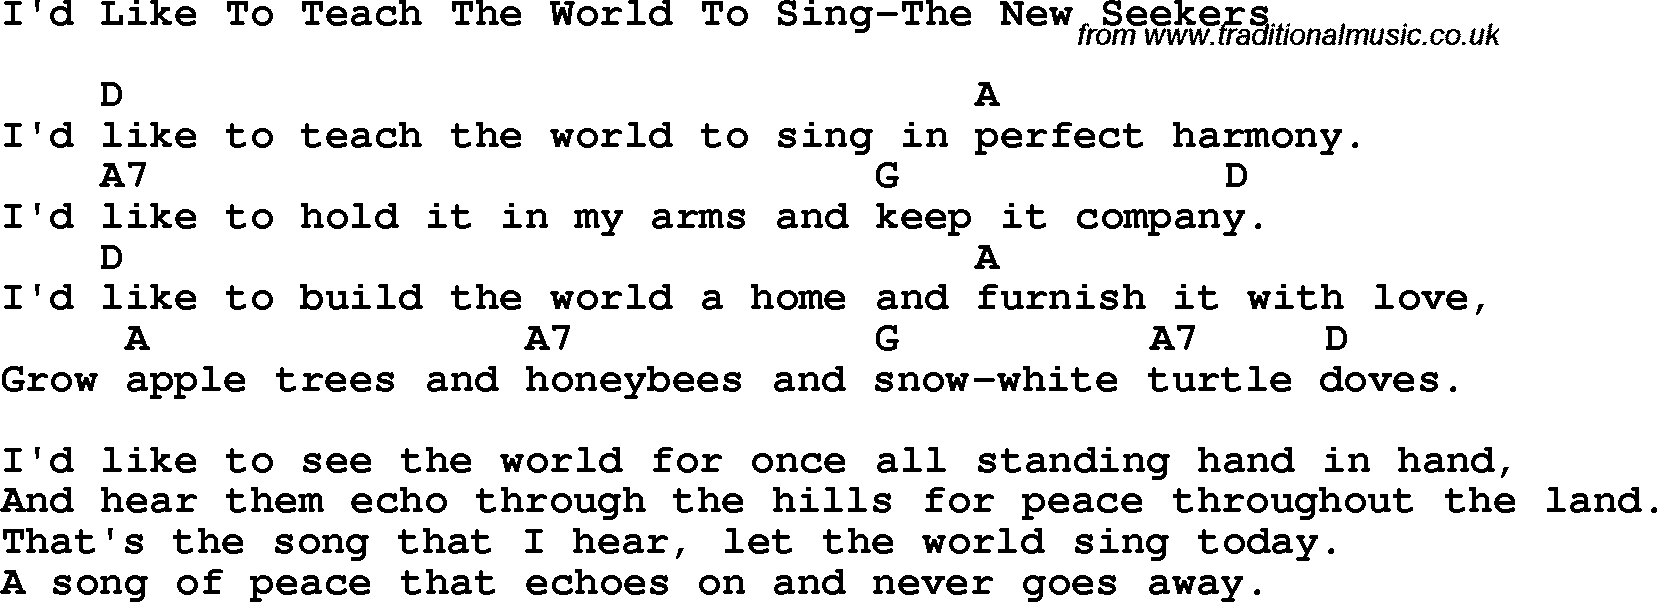 Protest Song I'd Like To Teach The World To Sing-The New Seekers lyrics and chords